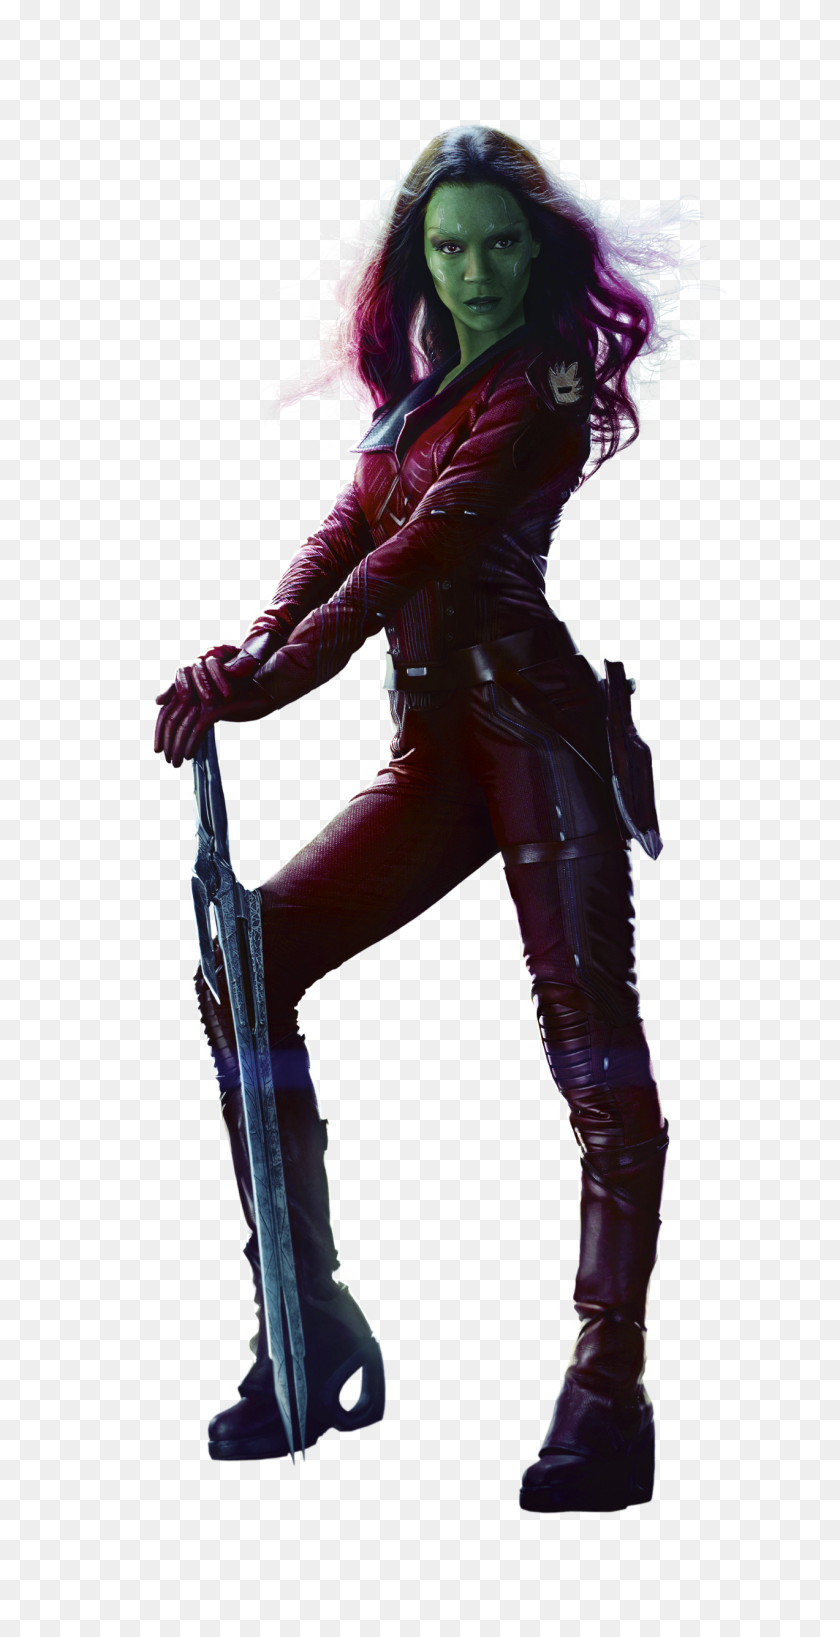 1273x2575 Image - Guardians Of The Galaxy 2 PNG